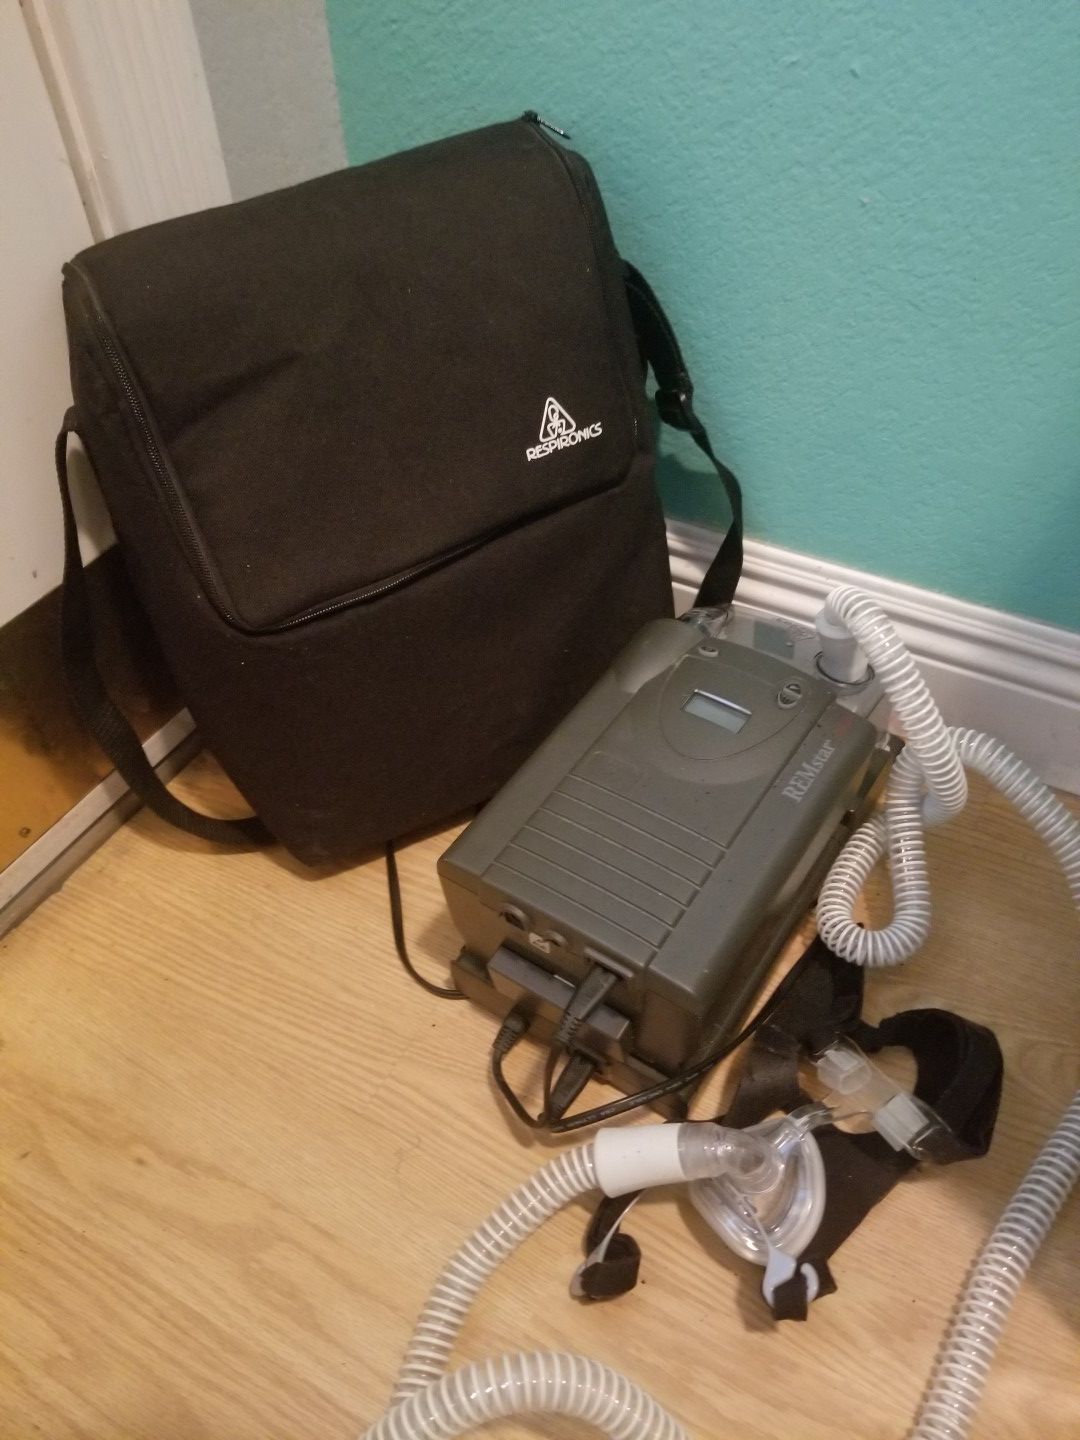 Respironics REMstar Plus CPAP Breathing machine..Great for people with COPD and Breathing problems..Has Heated Humidifier Also..Like New!